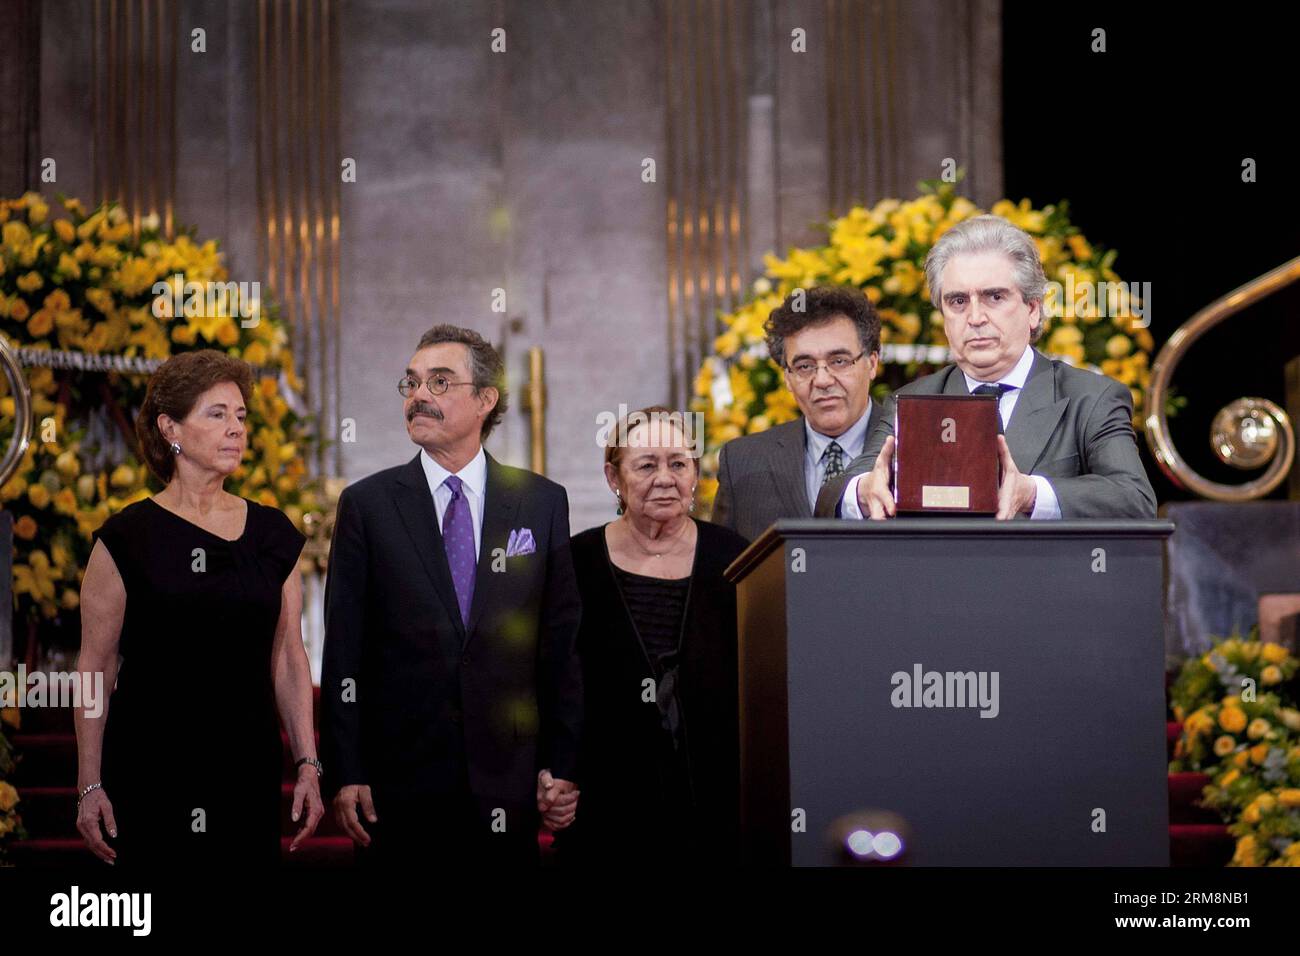 (140422) -- MEXICO CITY, April 21, 2014 (Xinhua) -- Rafael Tovar y de Teresa (R), president of the National Council for Culture and the Arts (Conaculta, for its acronym in Spanish), holds the urn with the remains of late Colombian writer Gabriel Garcia Marquez, next to Mercedes Barcha (C) widow of Garcia Marquez, and their sons Rodrigo Garcia Barcha (2nd R) and Gonzalo Garcia Barcha (2nd L) during a homage at the Palace of Fine Arts, in Mexico City, capital of Mexico, on April 21, 2014. (Xinhua/Pedro Mera) MEXICO-MEXICO CITY-COLOMBIA-CULTURE-GARCIA MARQUEZ PUBLICATIONxNOTxINxCHN   Mexico City Stock Photo